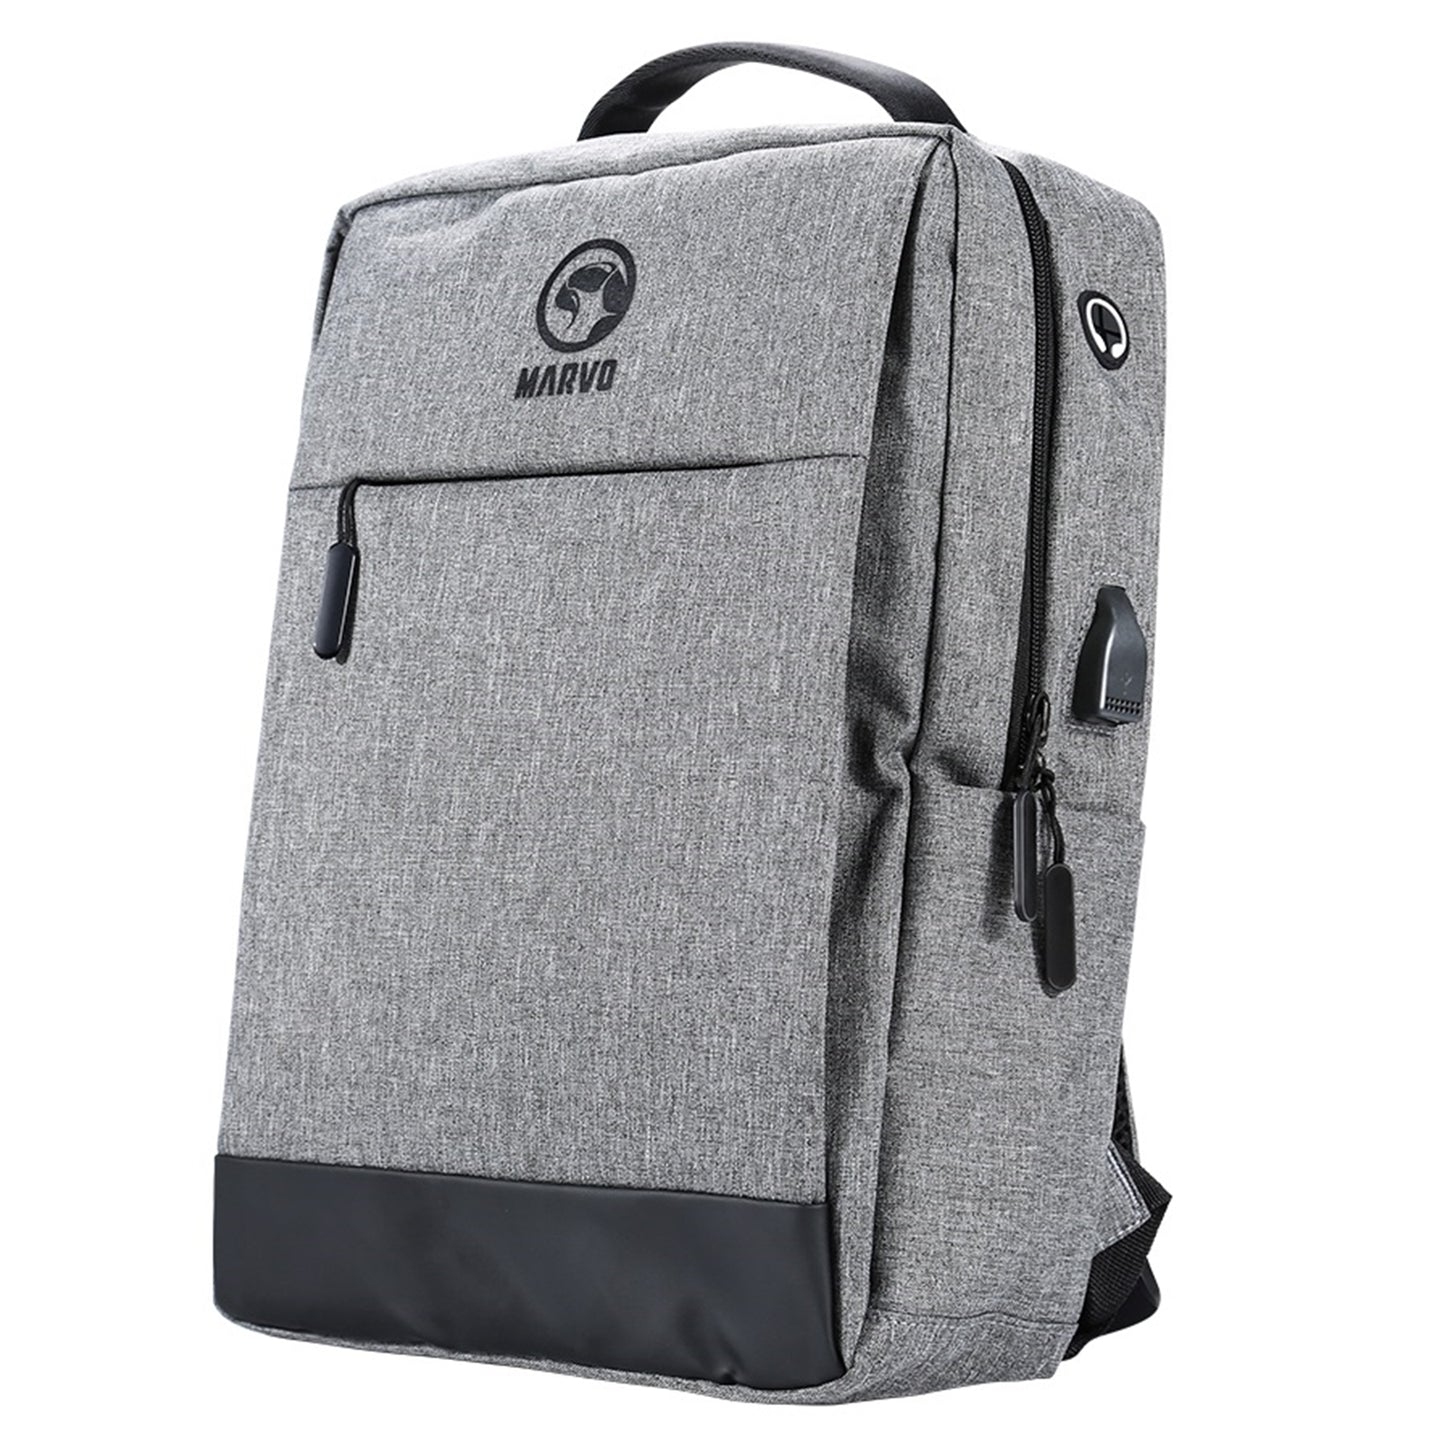 Marvo Laptop 15.6 inch Backpack with USB Charging Port, Waterproof Durable Fabric, Max Load 20kg